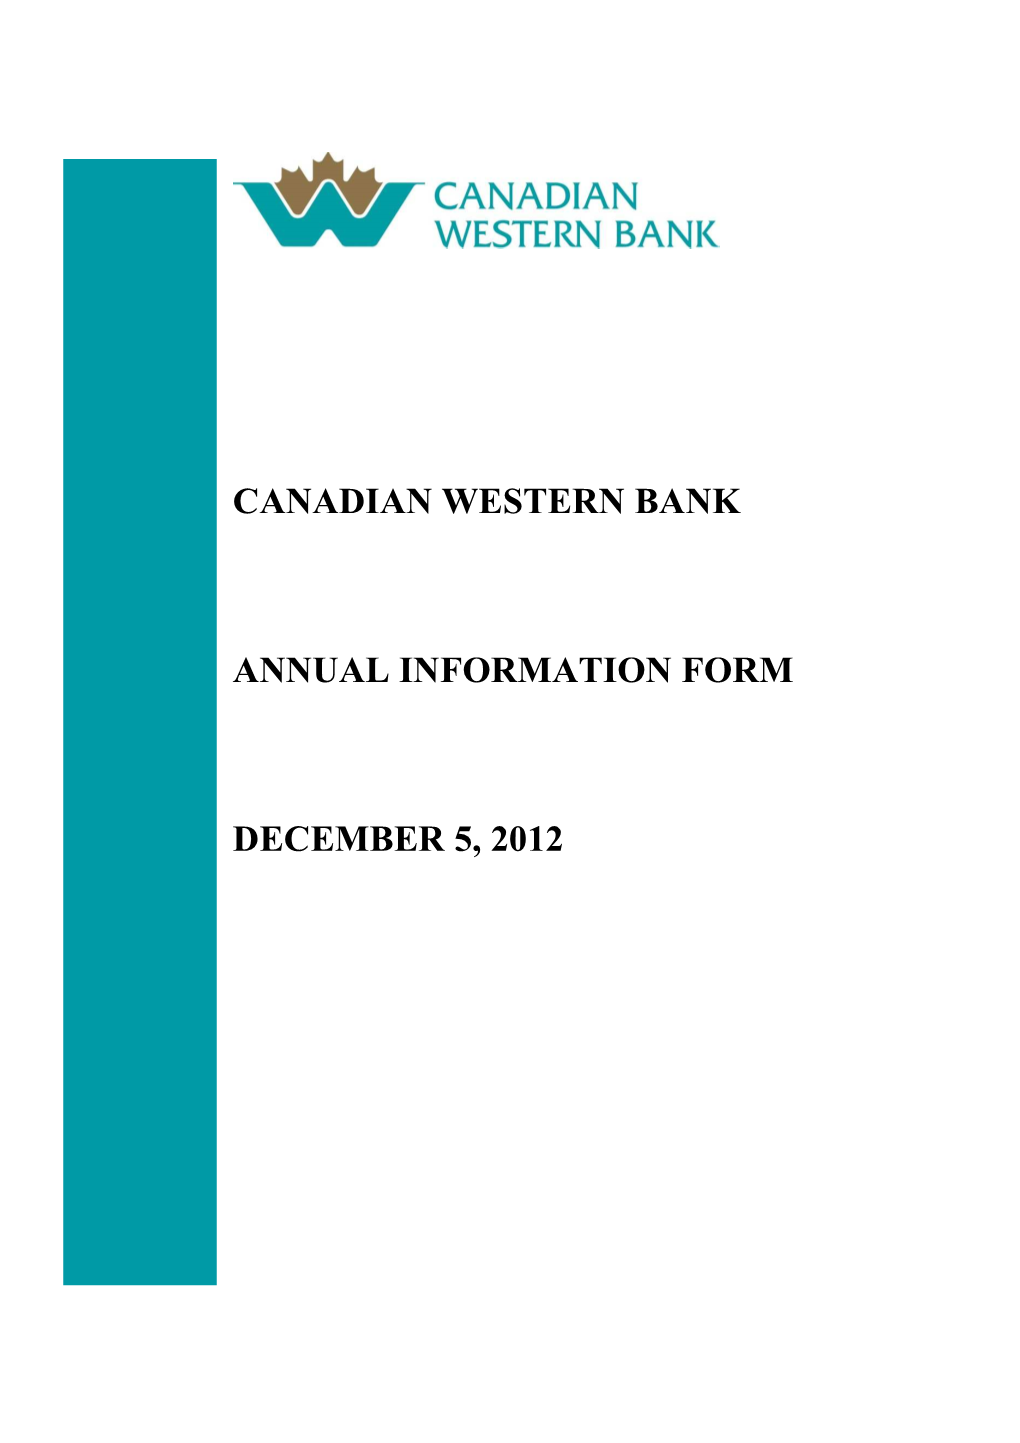 Canadian Western Bank Annual Information Form December 5, 2012